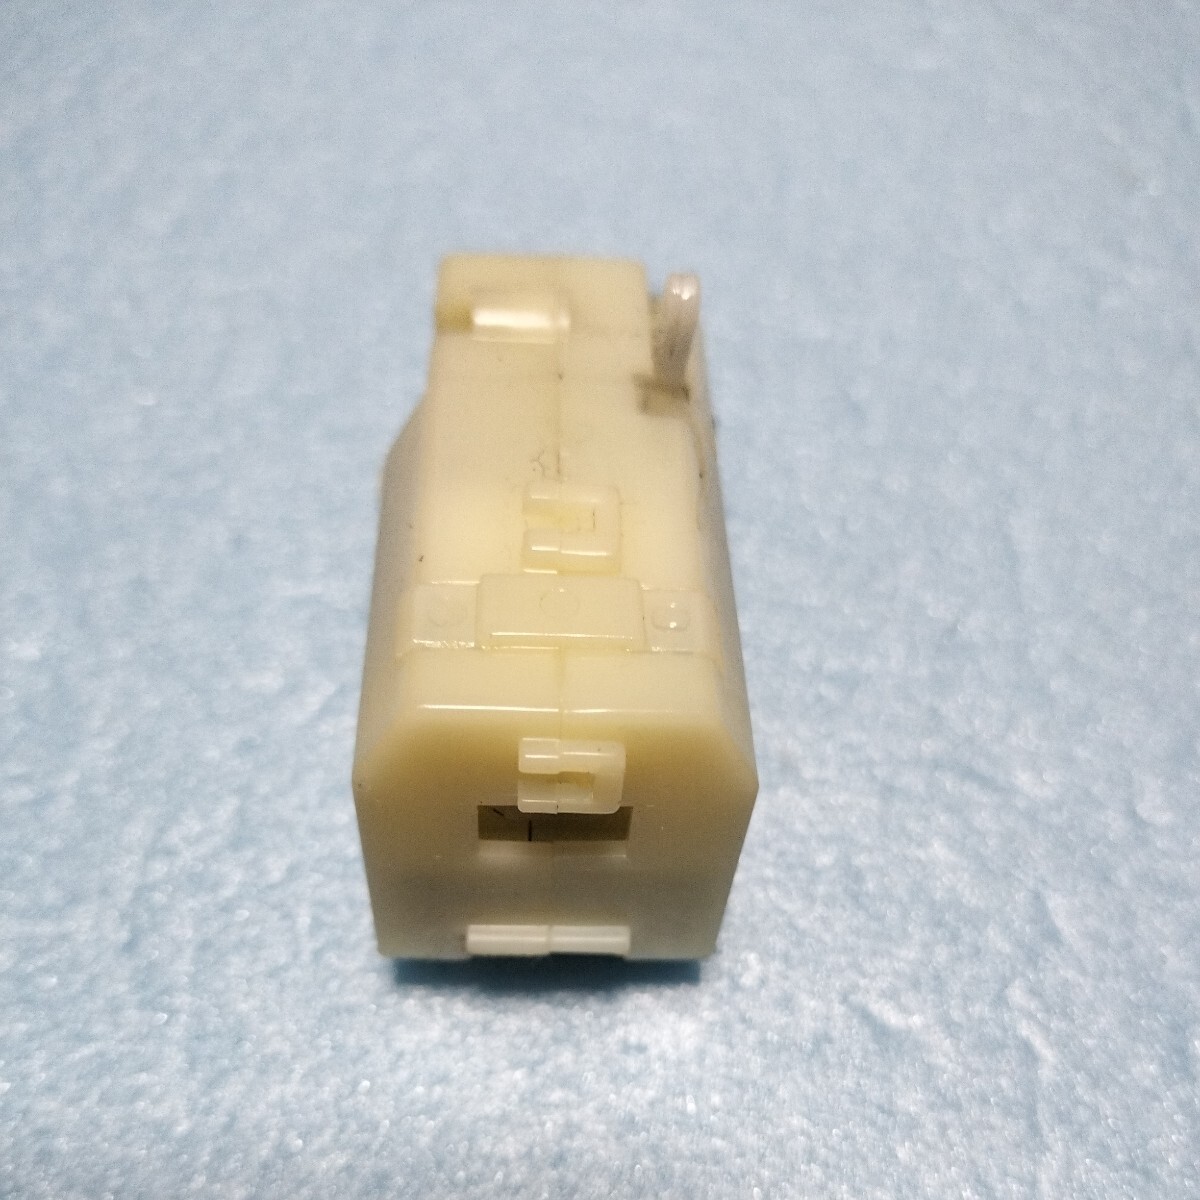  Plarail [ including in a package OK] Plarail for [ motor unit single 2 battery for ] locomotive series etc. 